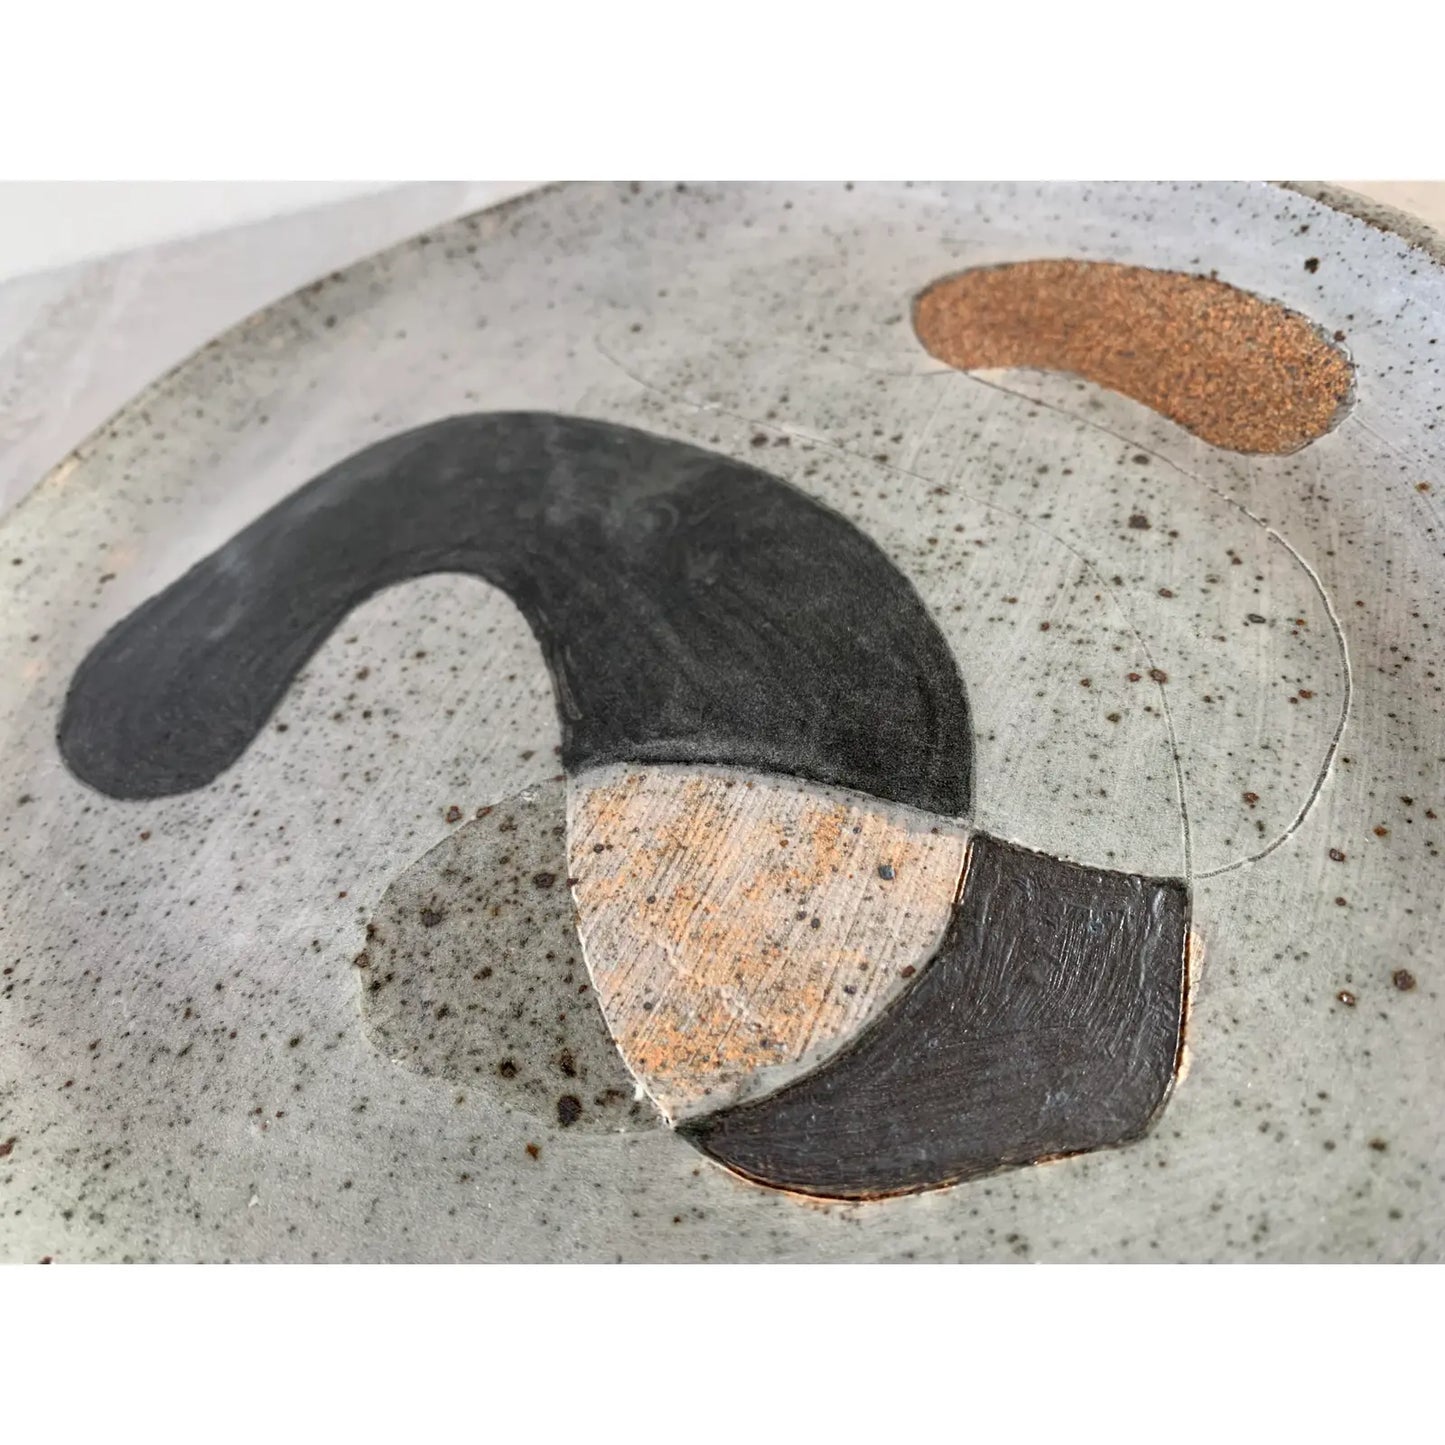 Studio Ceramic Platter With Abstract Decoration